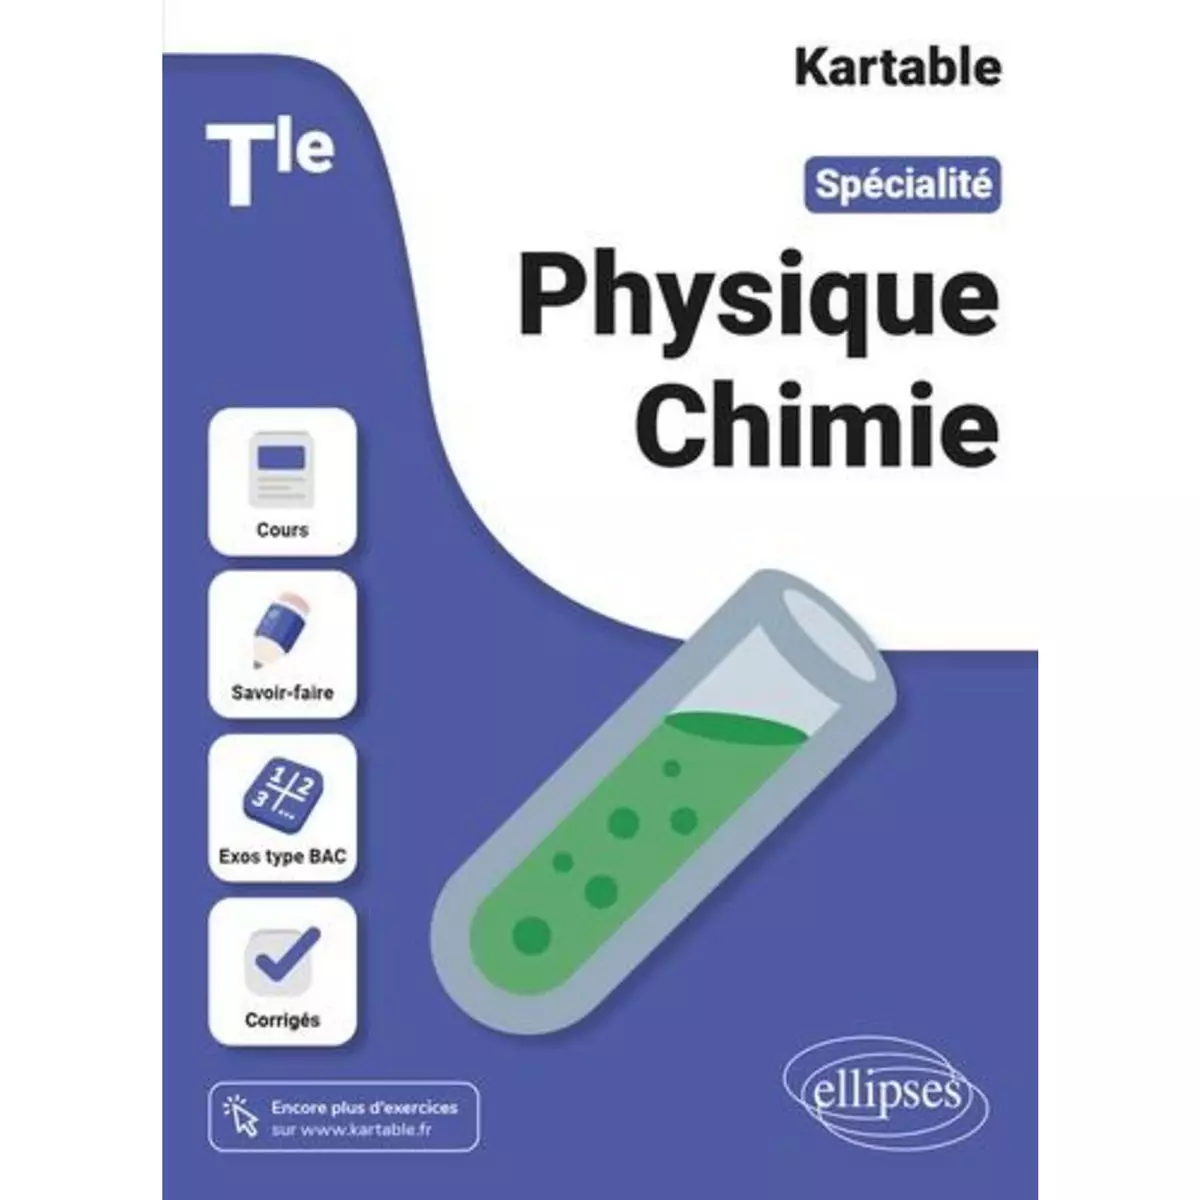  SPECIALITE PHYSIQUE-CHIMIE TLE, Ellipses marketing